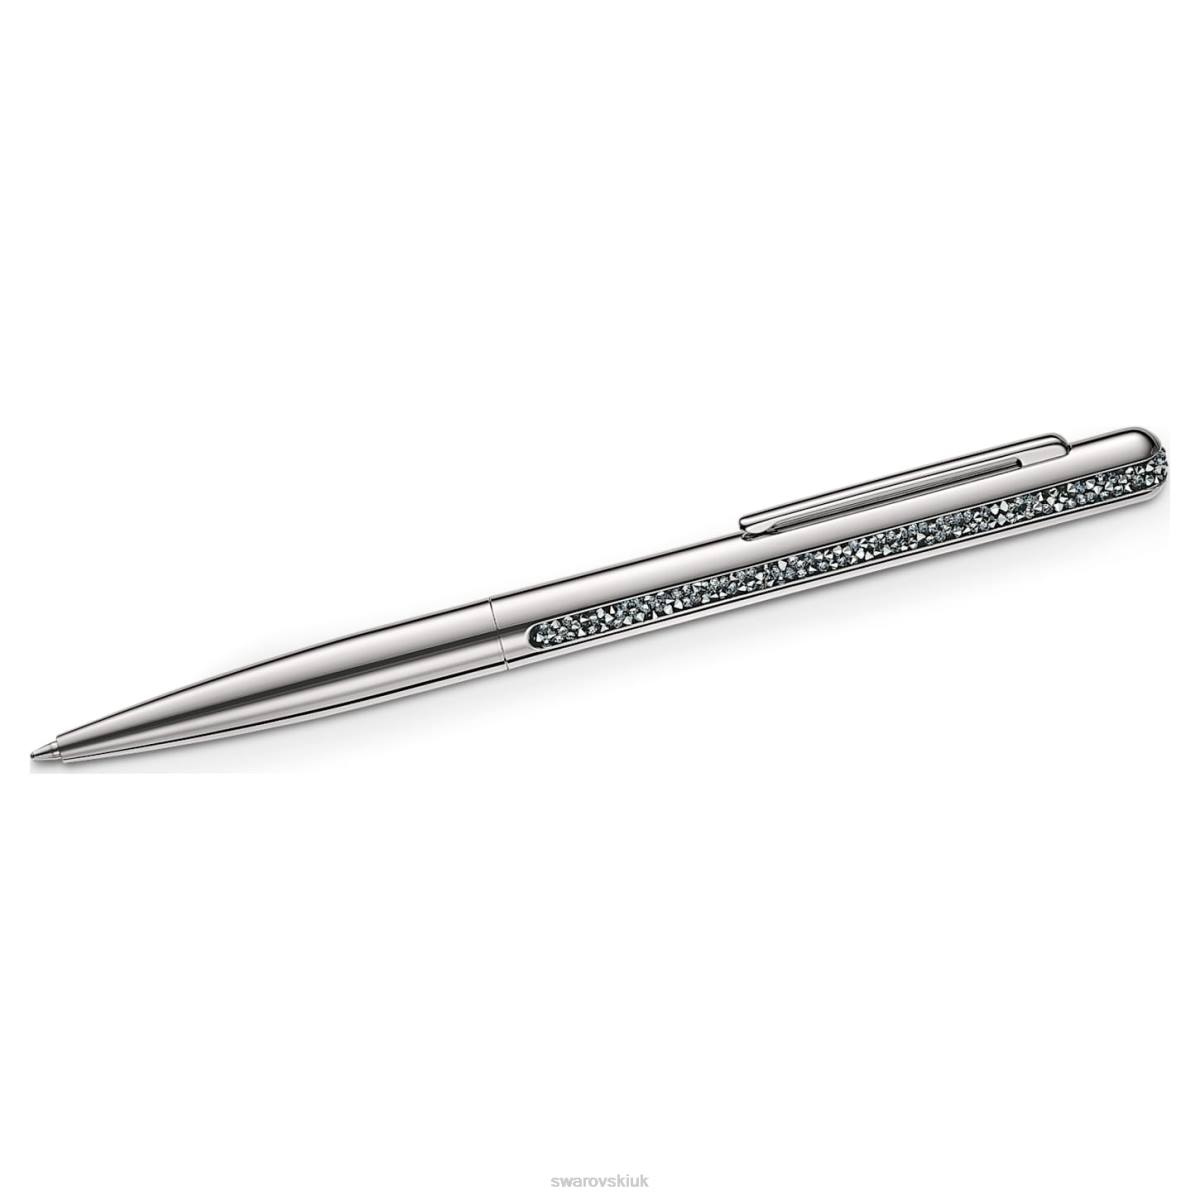 Accessories Swarovski Crystal Shimmer ballpoint pen Silver tone, Chrome plated 48JX1275